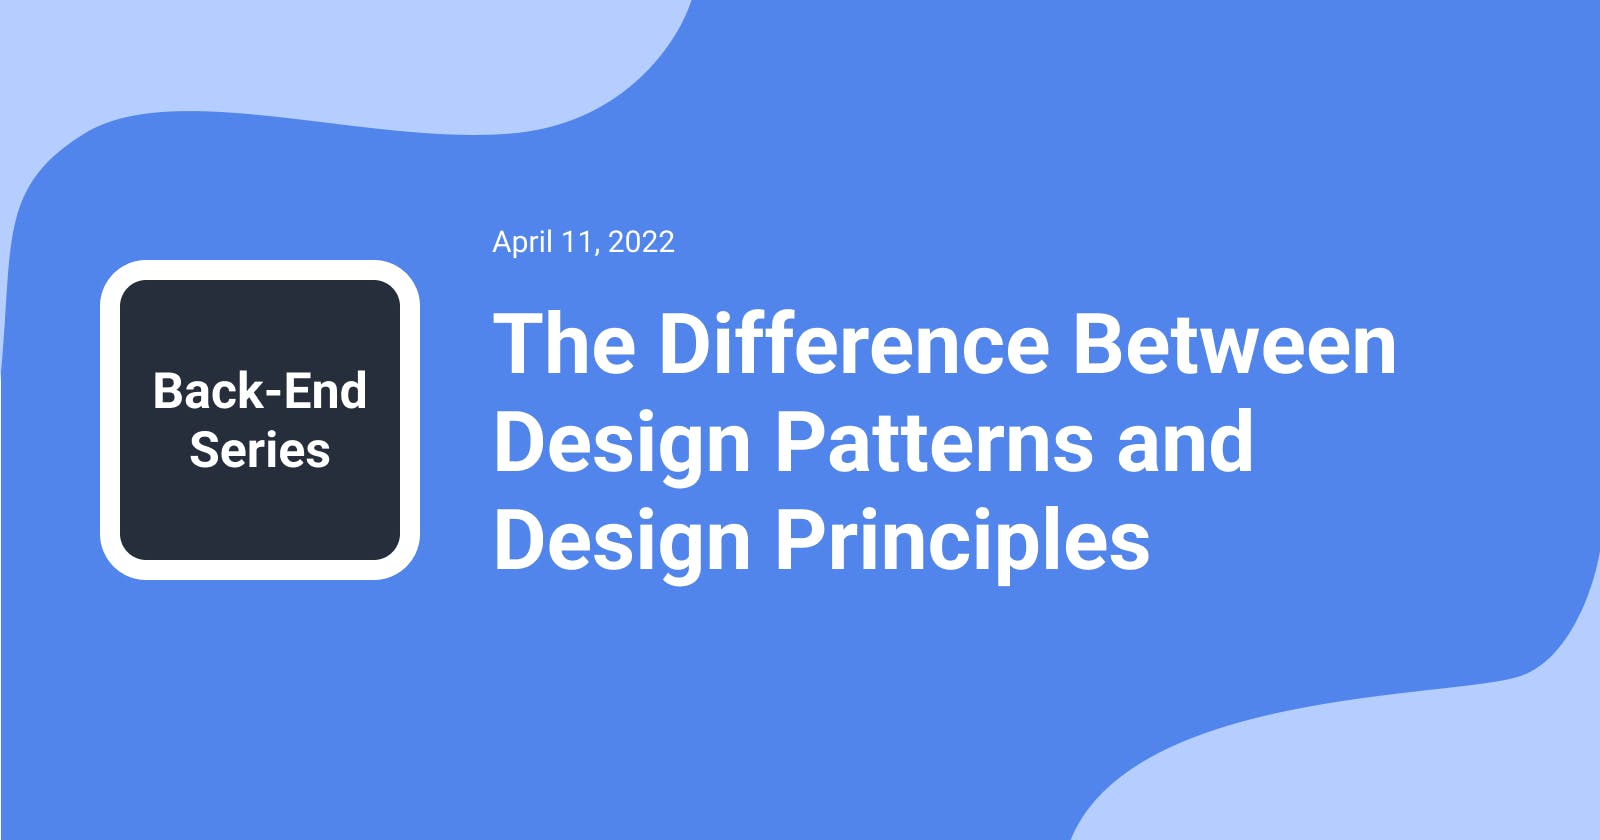 The Difference Between Design Patterns and Design Principles